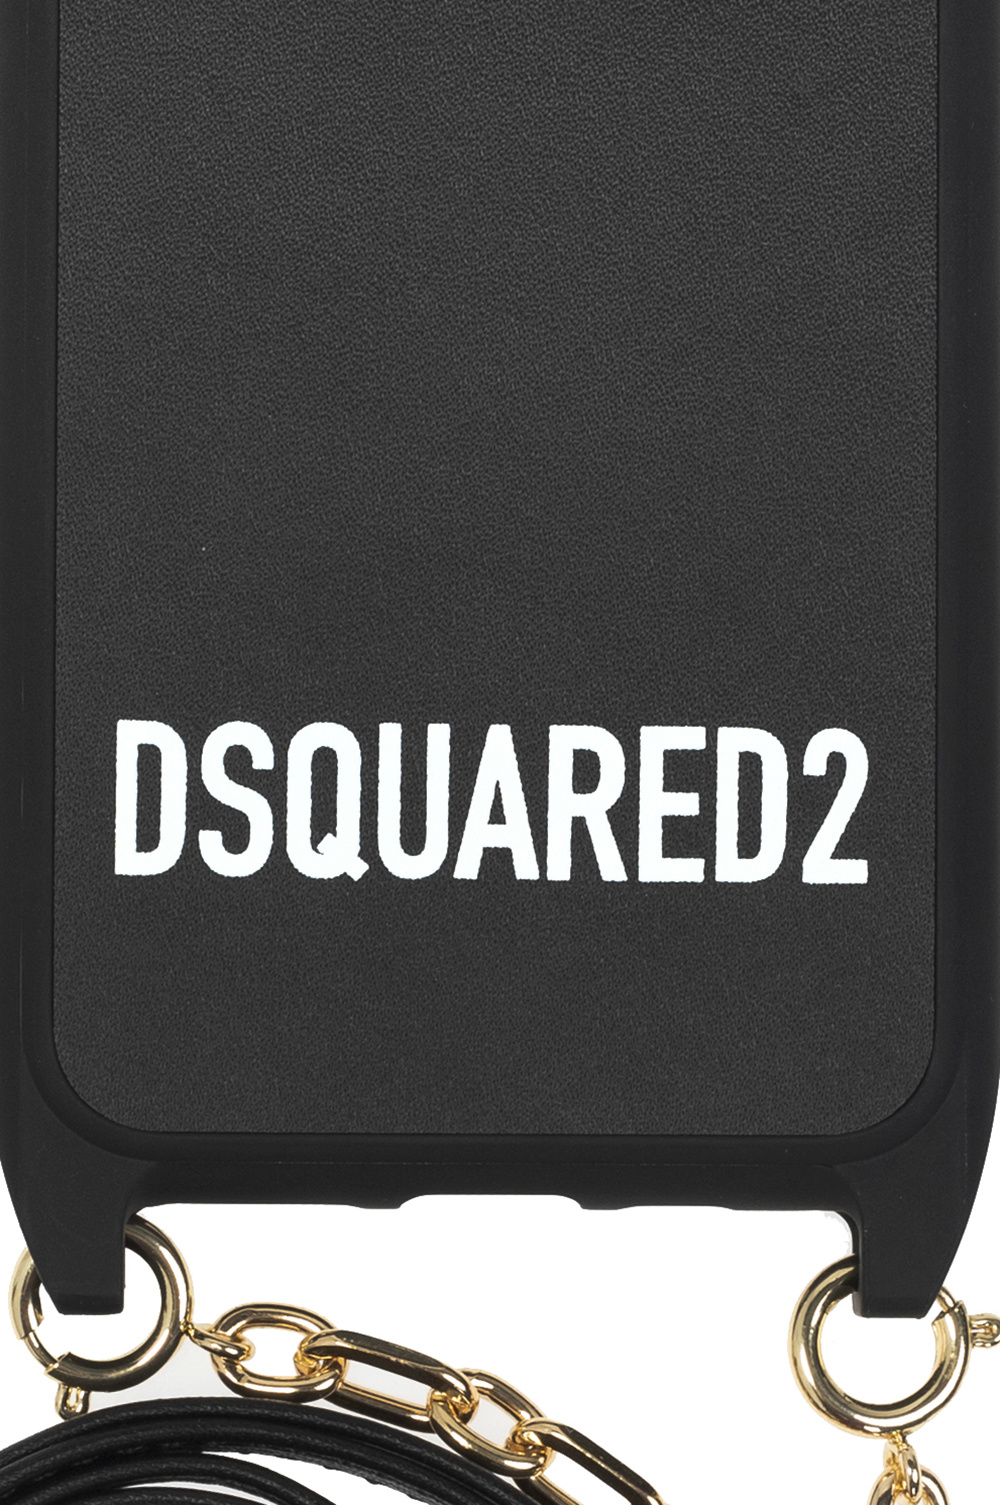 Dsquared2 iPhone 11 Pro case with logo